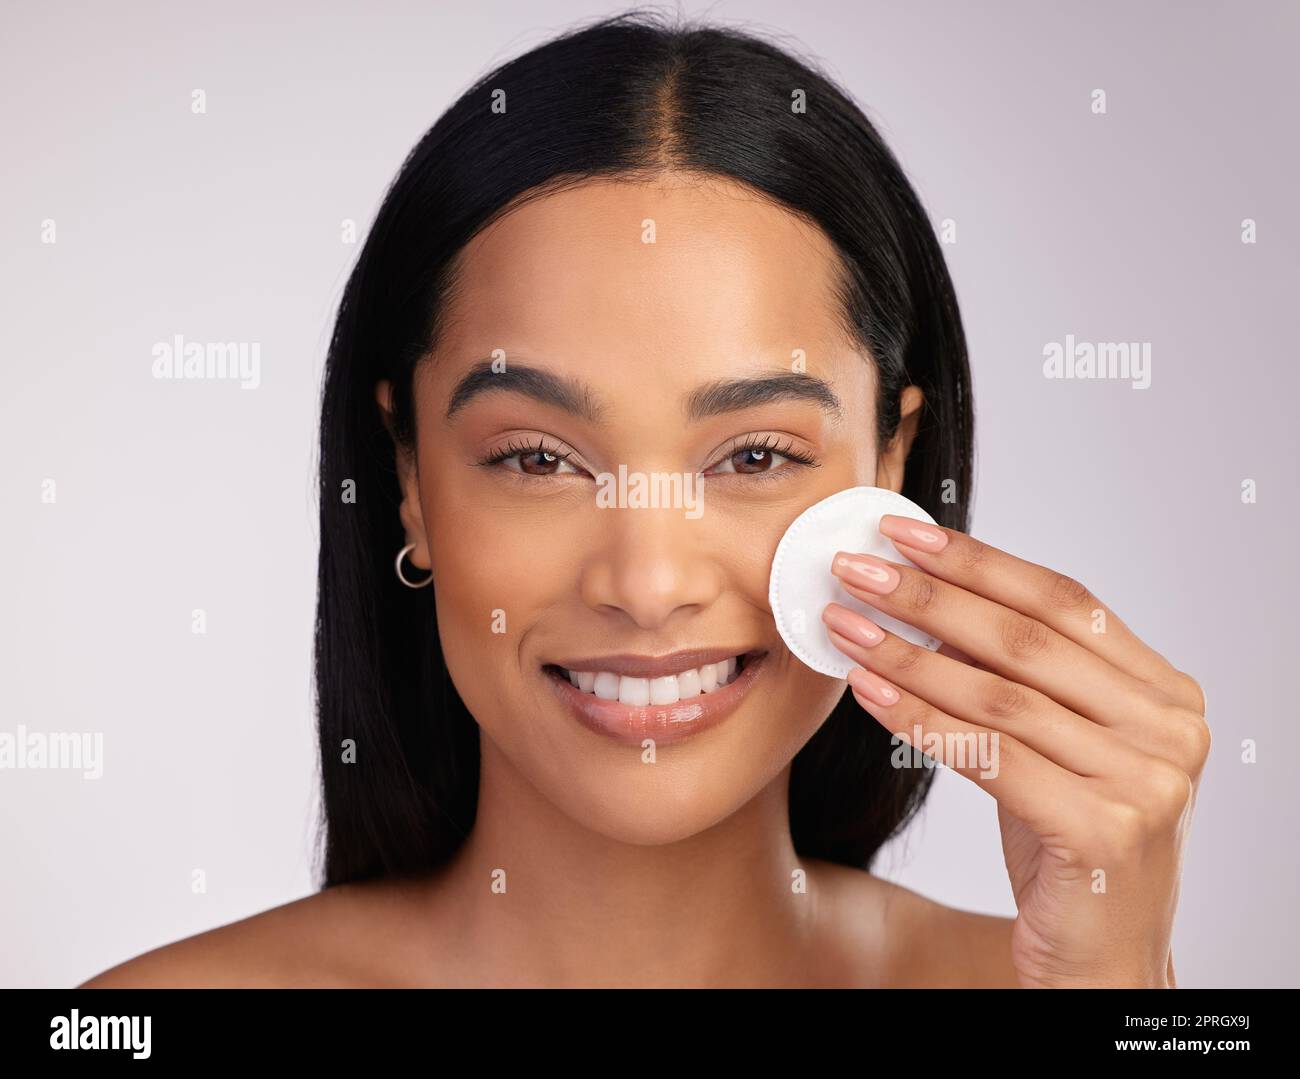 No clogged pores here. Cropped portrait of an attractive young woman exfoliating her face against a pink background Stock Photo